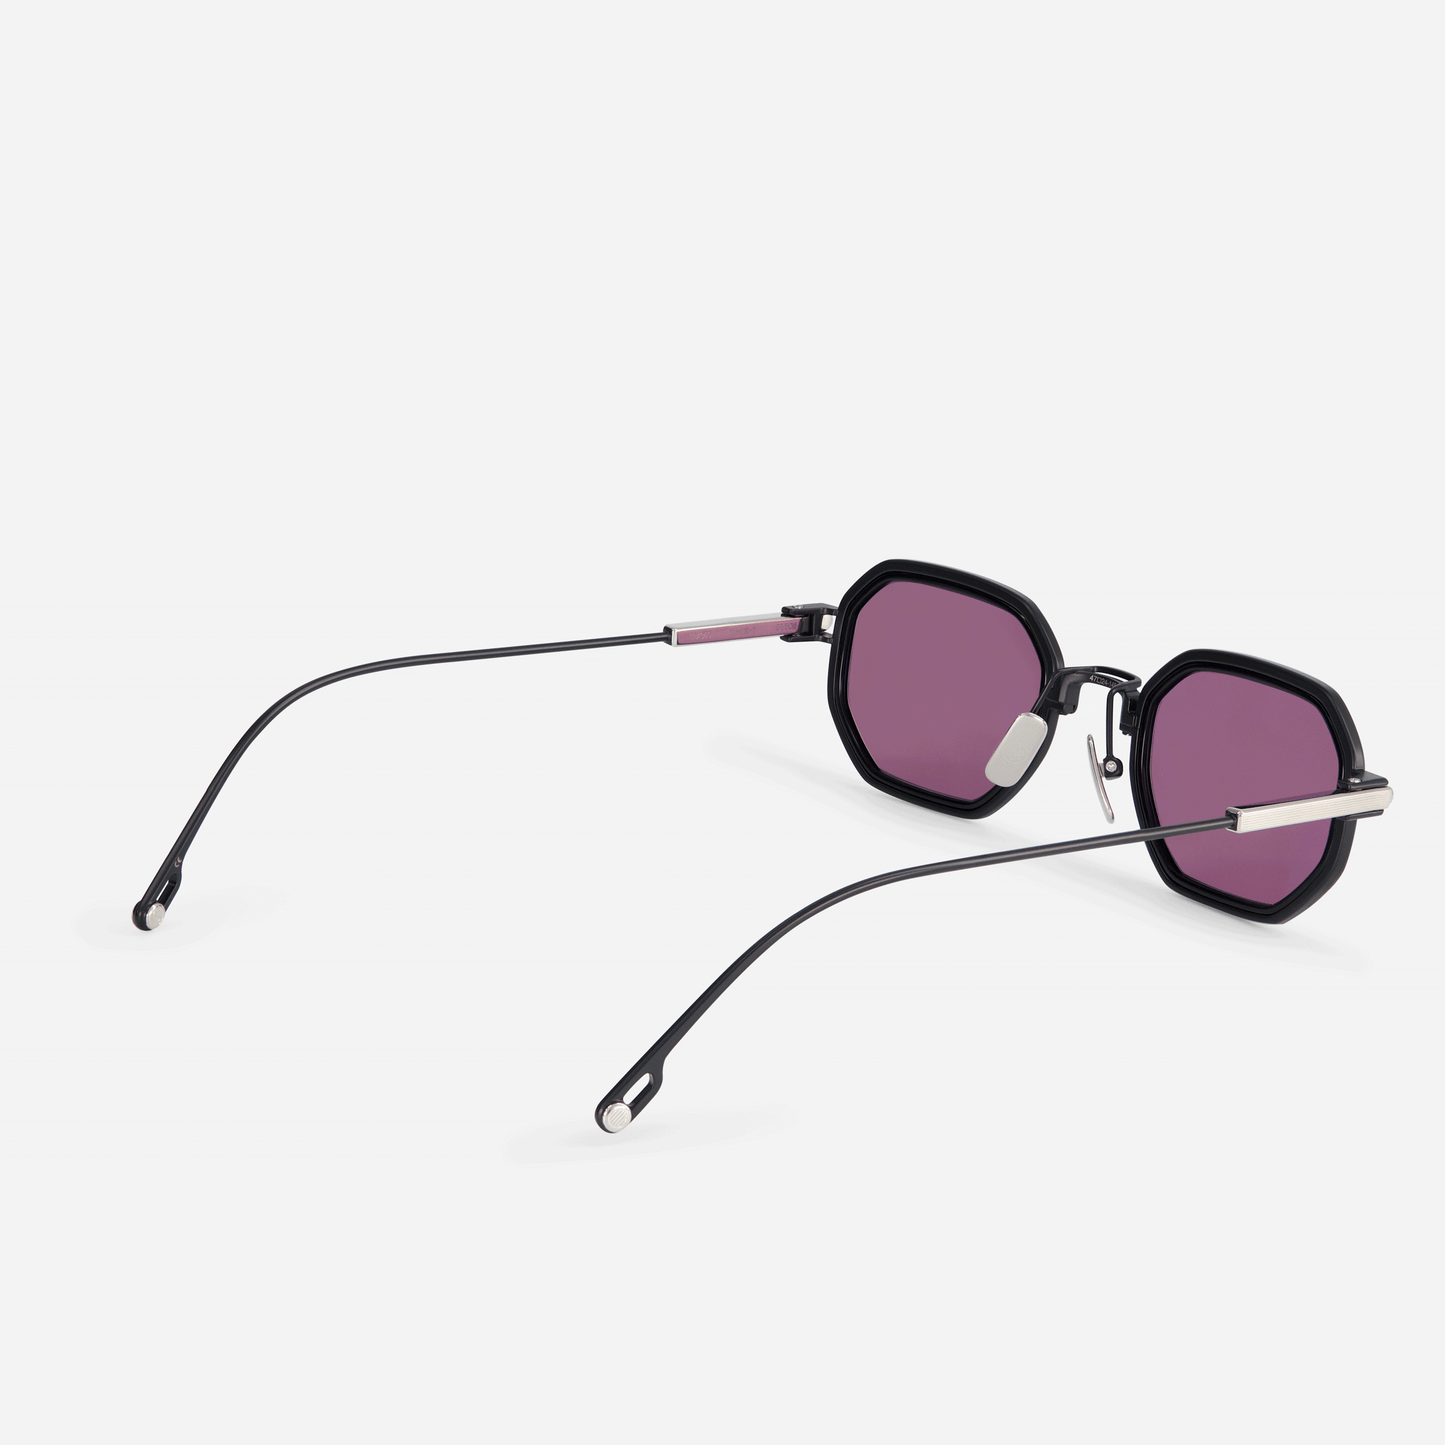 Timir-T S5505 glasses, meticulously constructed from pure black and platinum titanium frames, featuring a black Takiron insert and violet lenses.